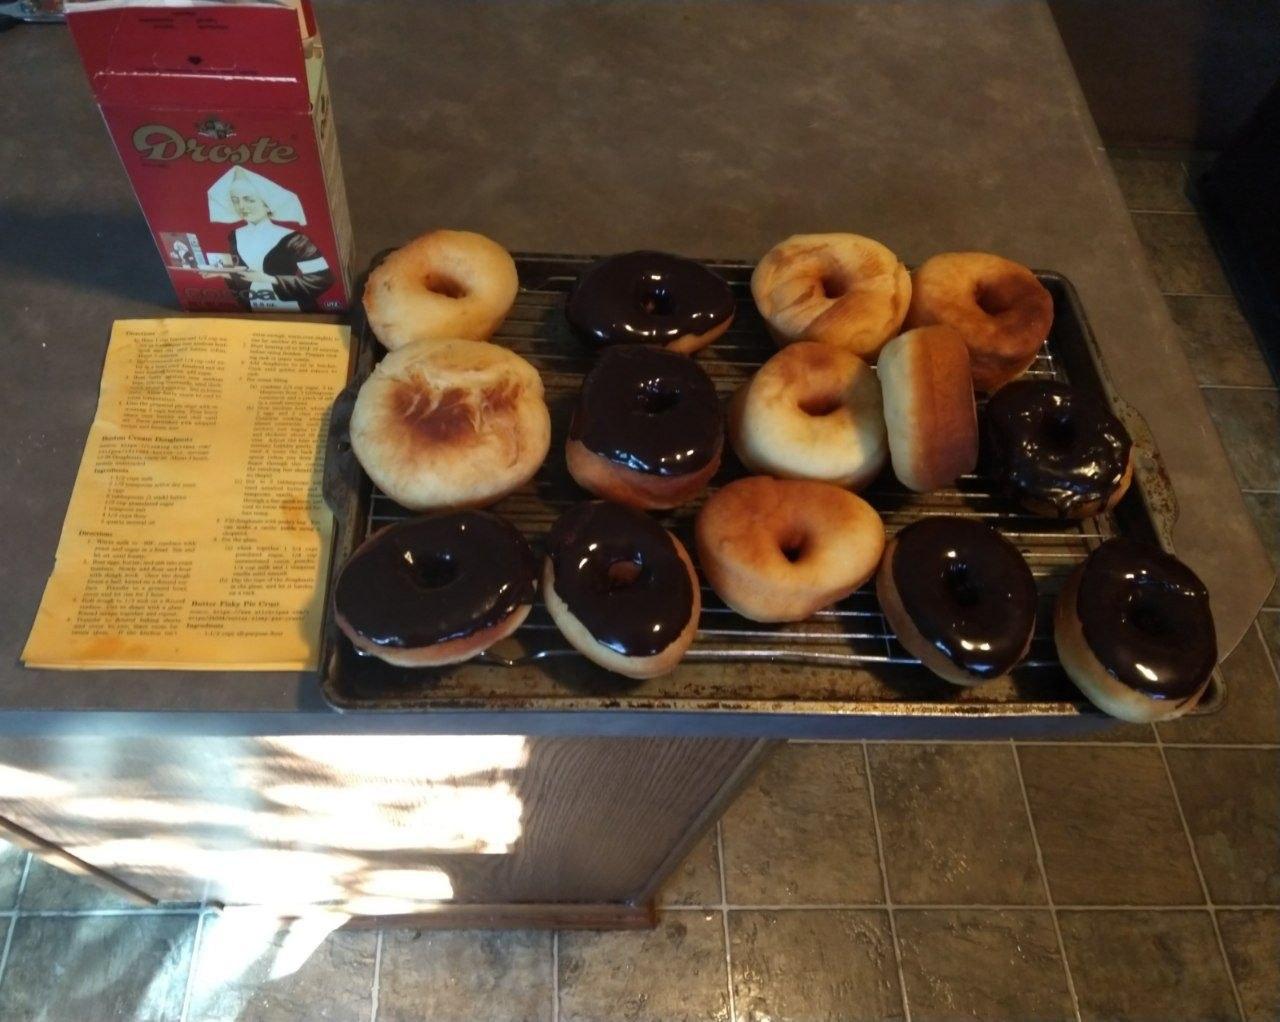 Donuts on a cooling rack, some are glazed already.